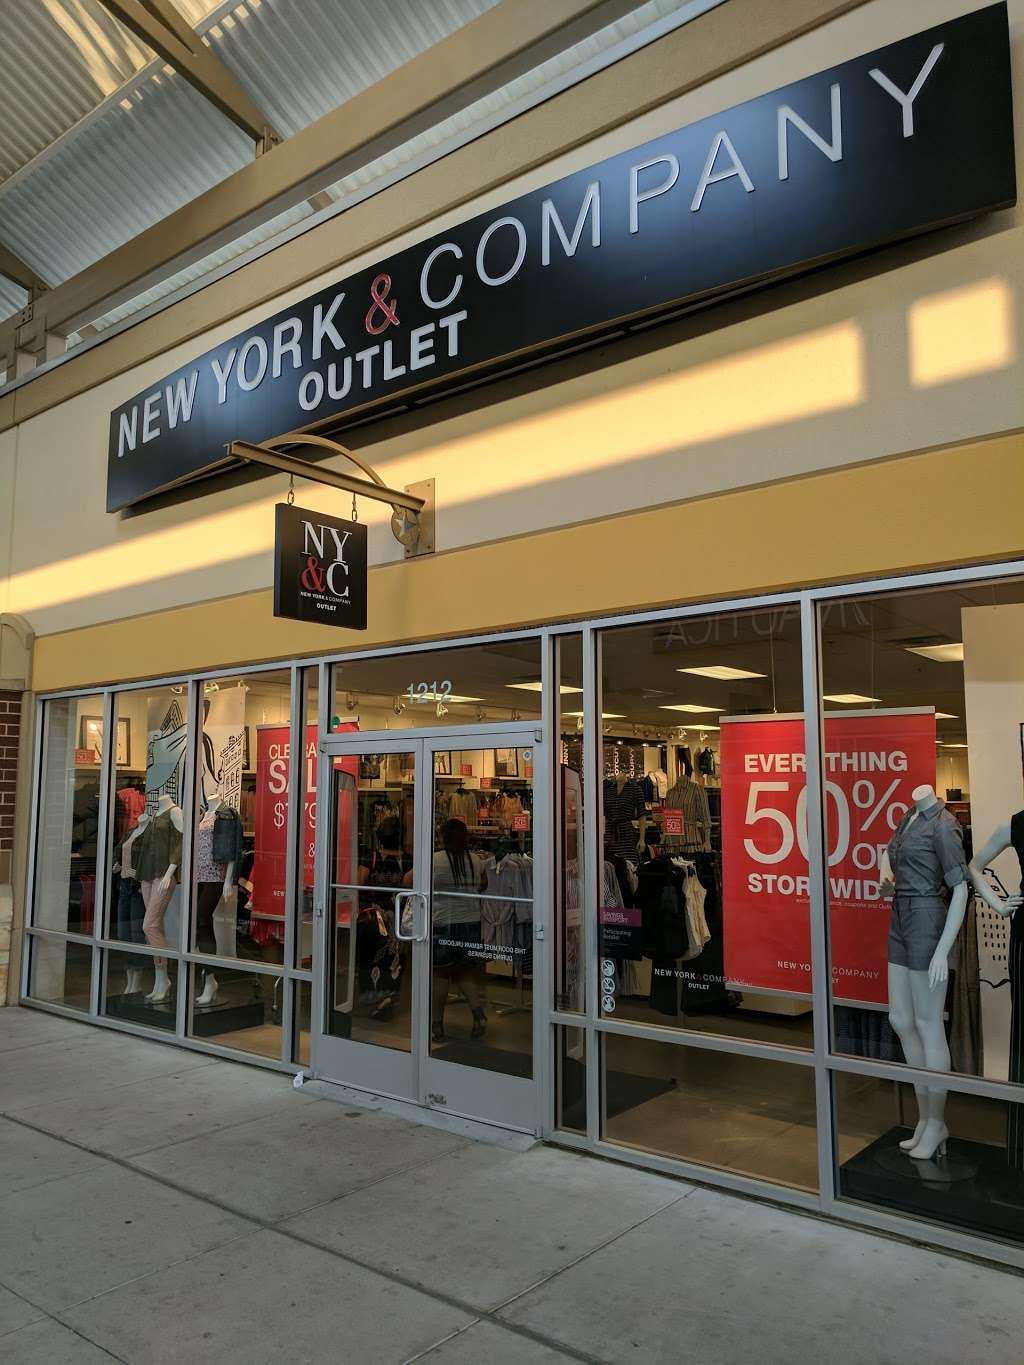 New York & Company Outlet | 29300 Hempstead Rd Houston Premium Outlet, Suite 1212, 29300 Hempstead Rd, Cypress, TX 77433 | Phone: (281) 758-3841